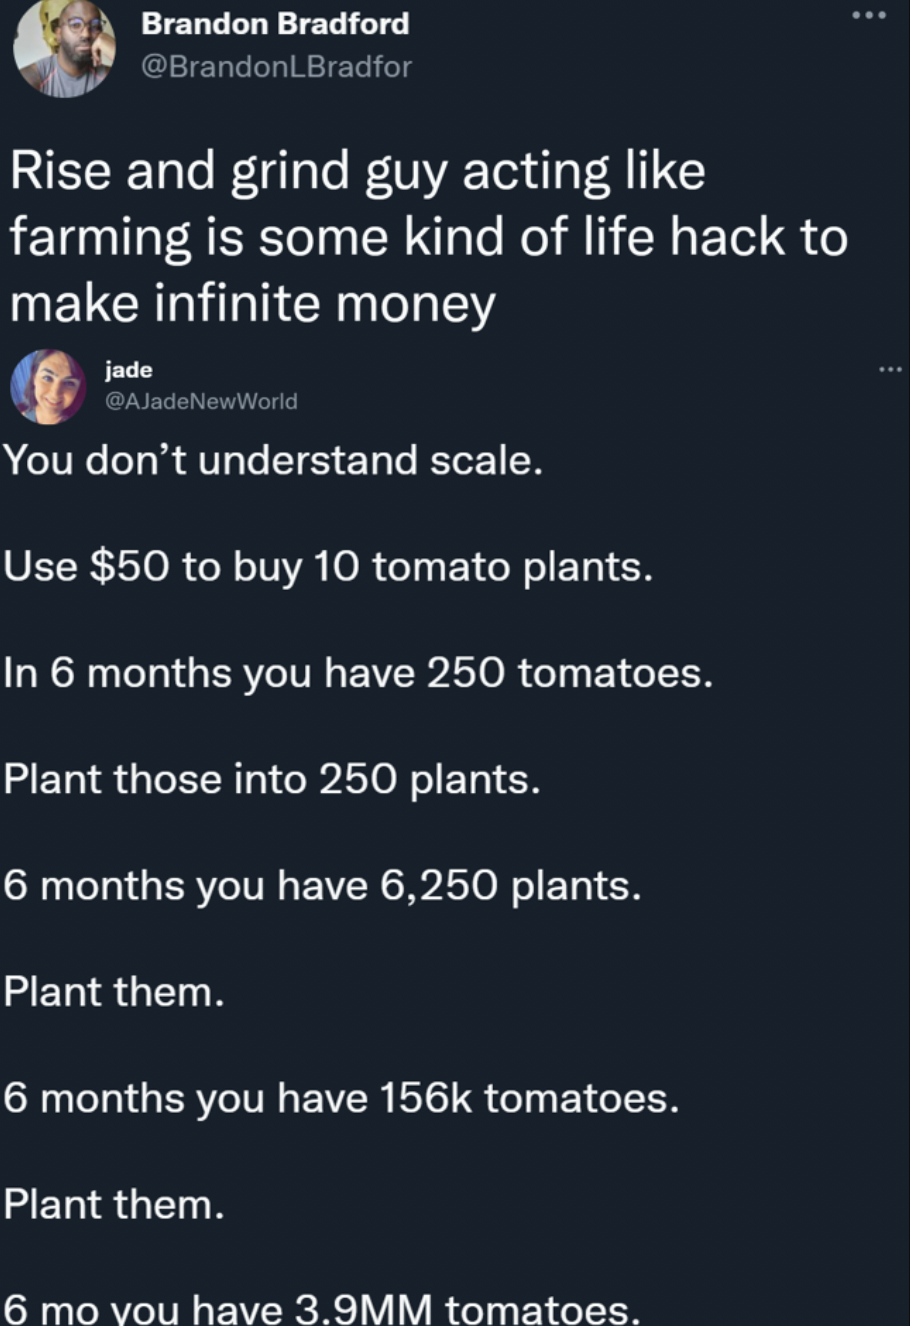 Funny facepalms - and grind guy acting farming is some kind of life hack to make infinite money jade You don't understand scale. Use $50 to buy 10 tomato plants. In 6 months you have 250 tomatoes.